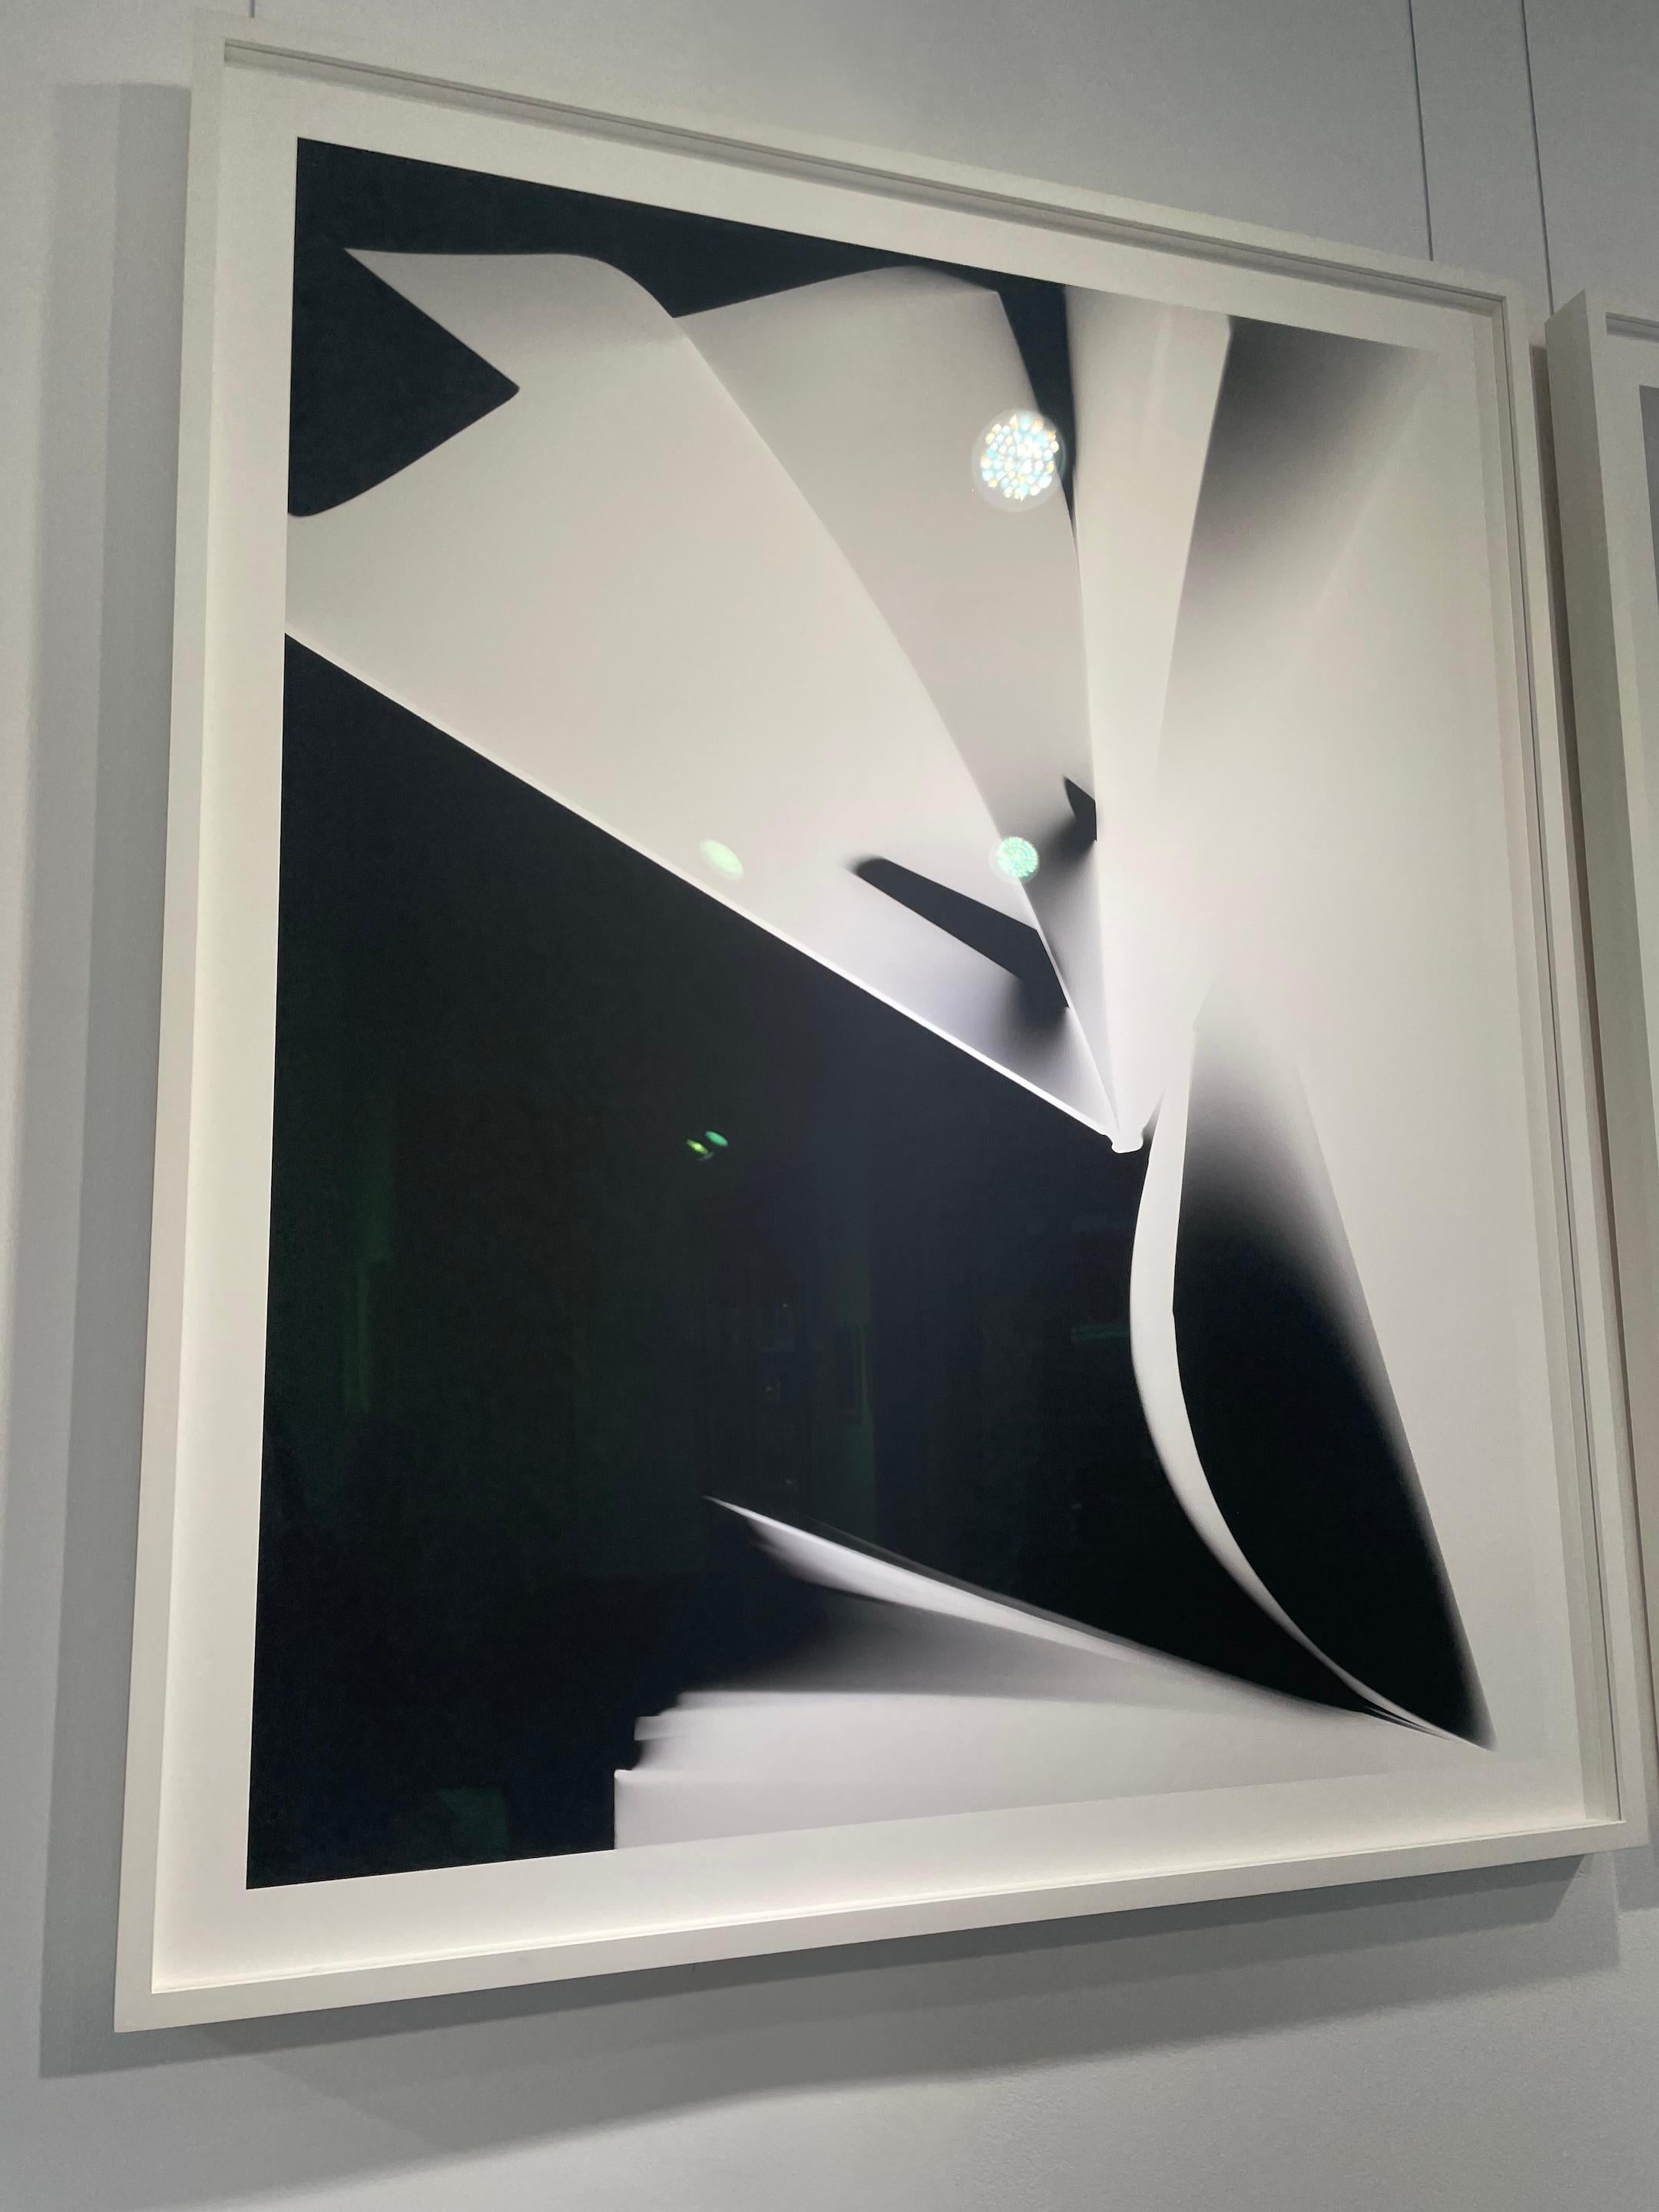 PHOTOGRAMS LITERARY UNITITLED 46 - Contemporary Photograph by Wendy Paton